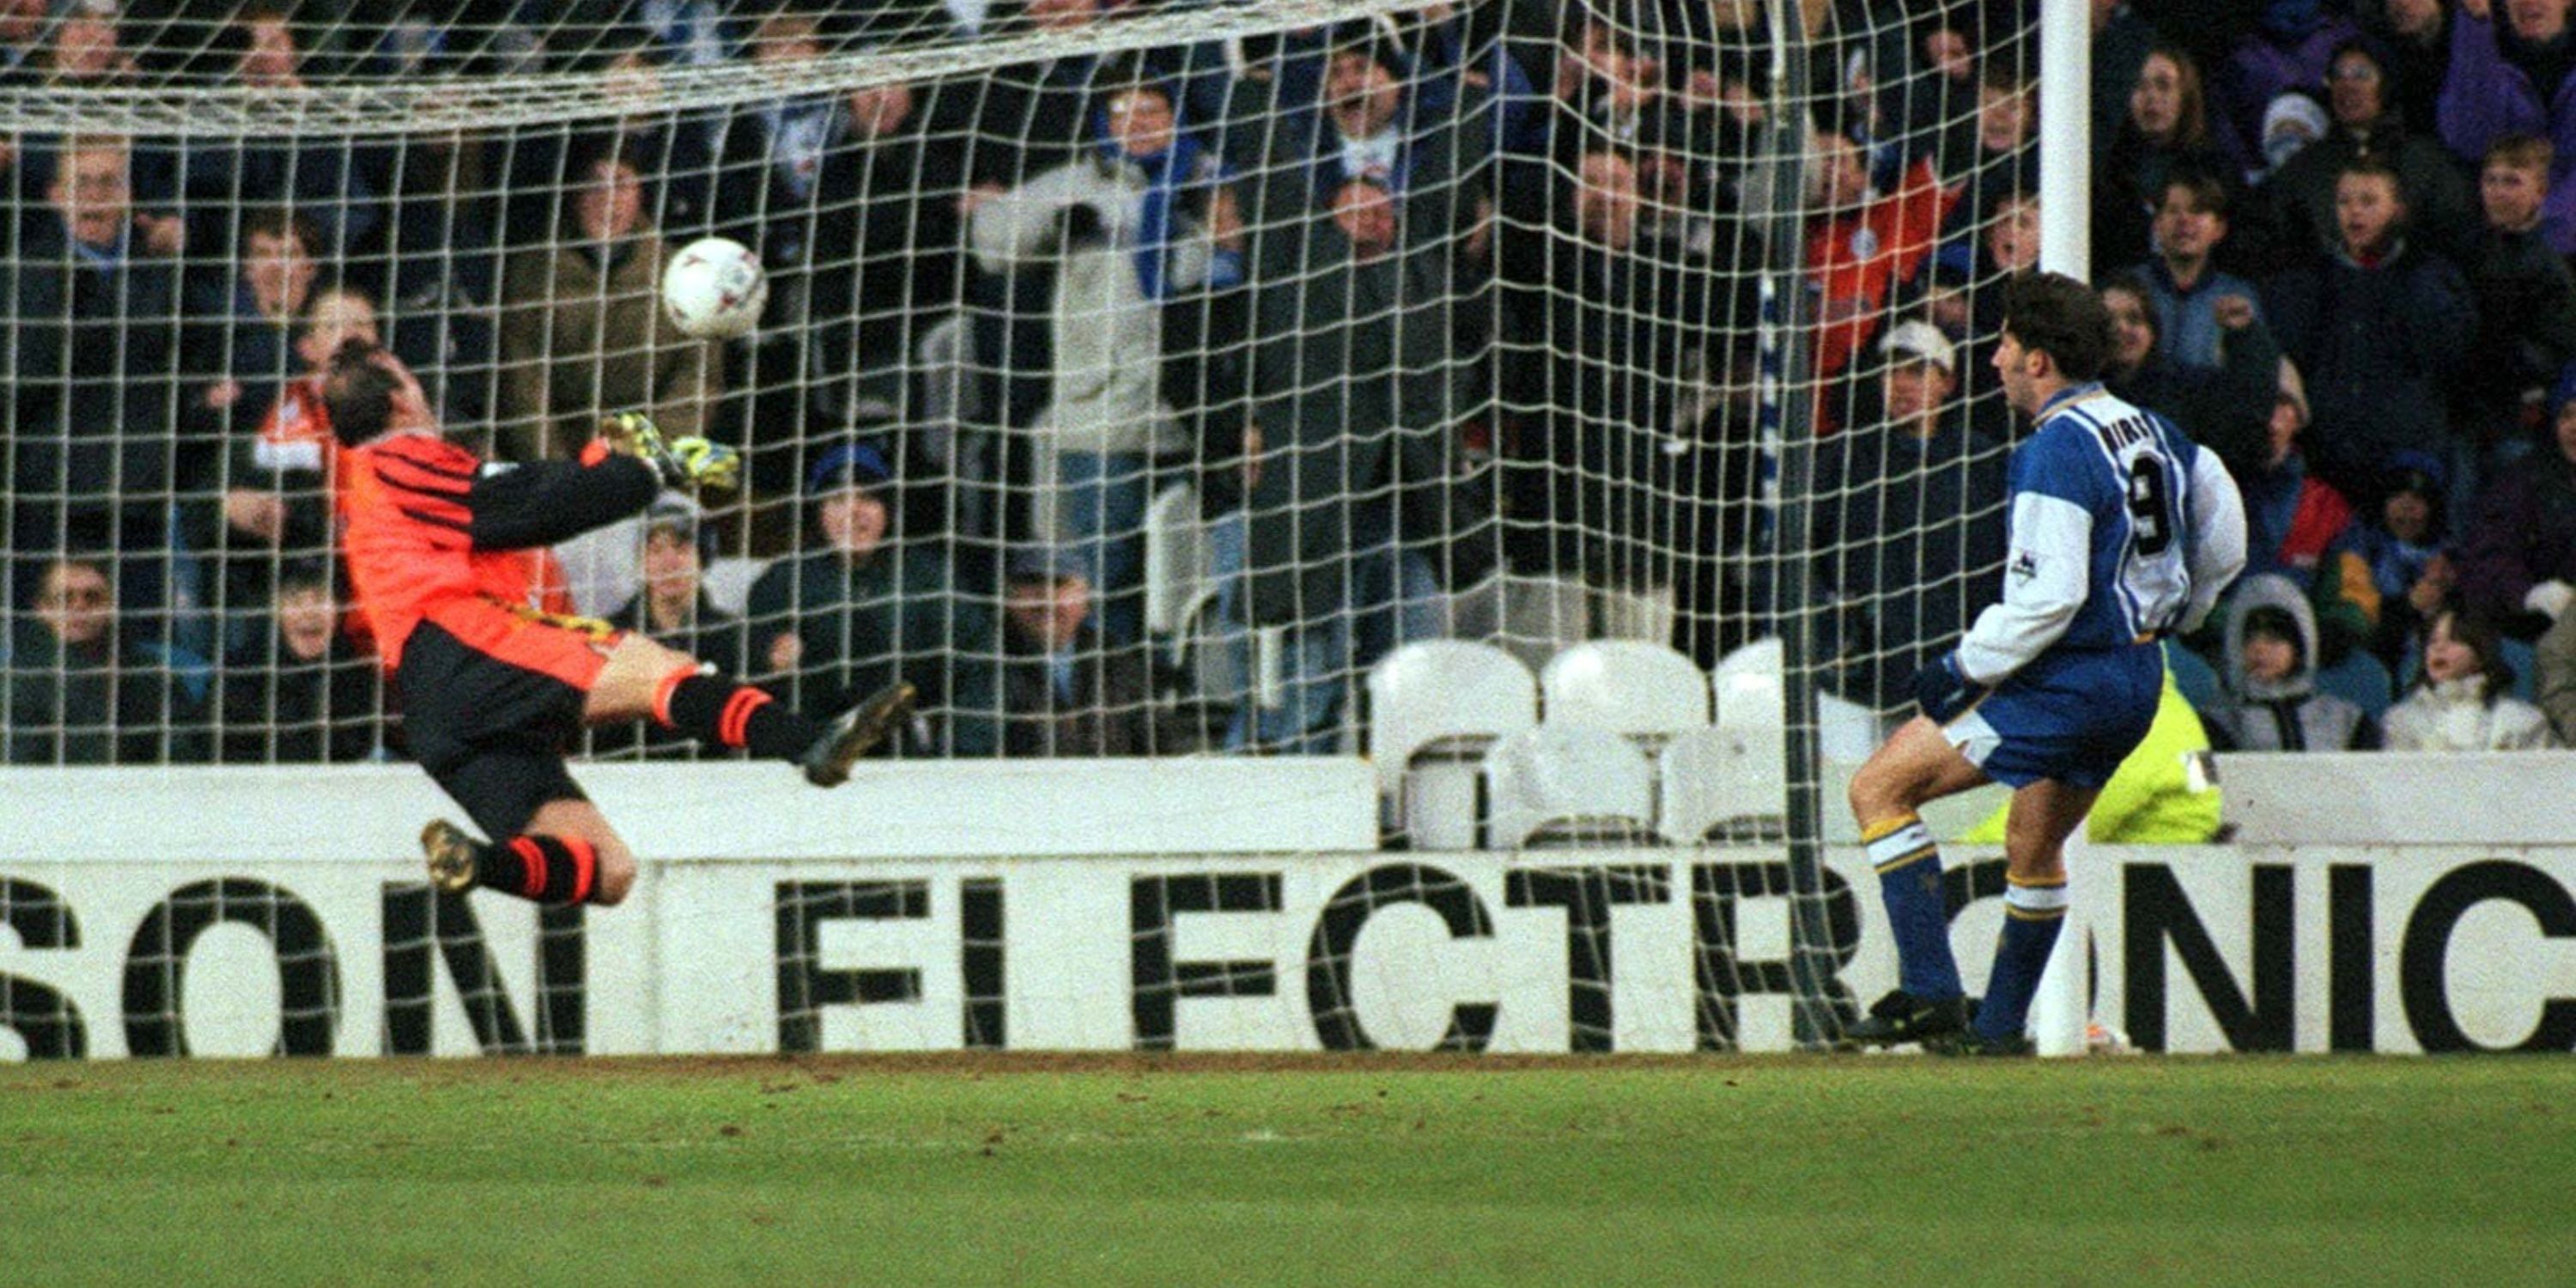 Sheffield Wednesday's David Hirst scores the 2nd goal.